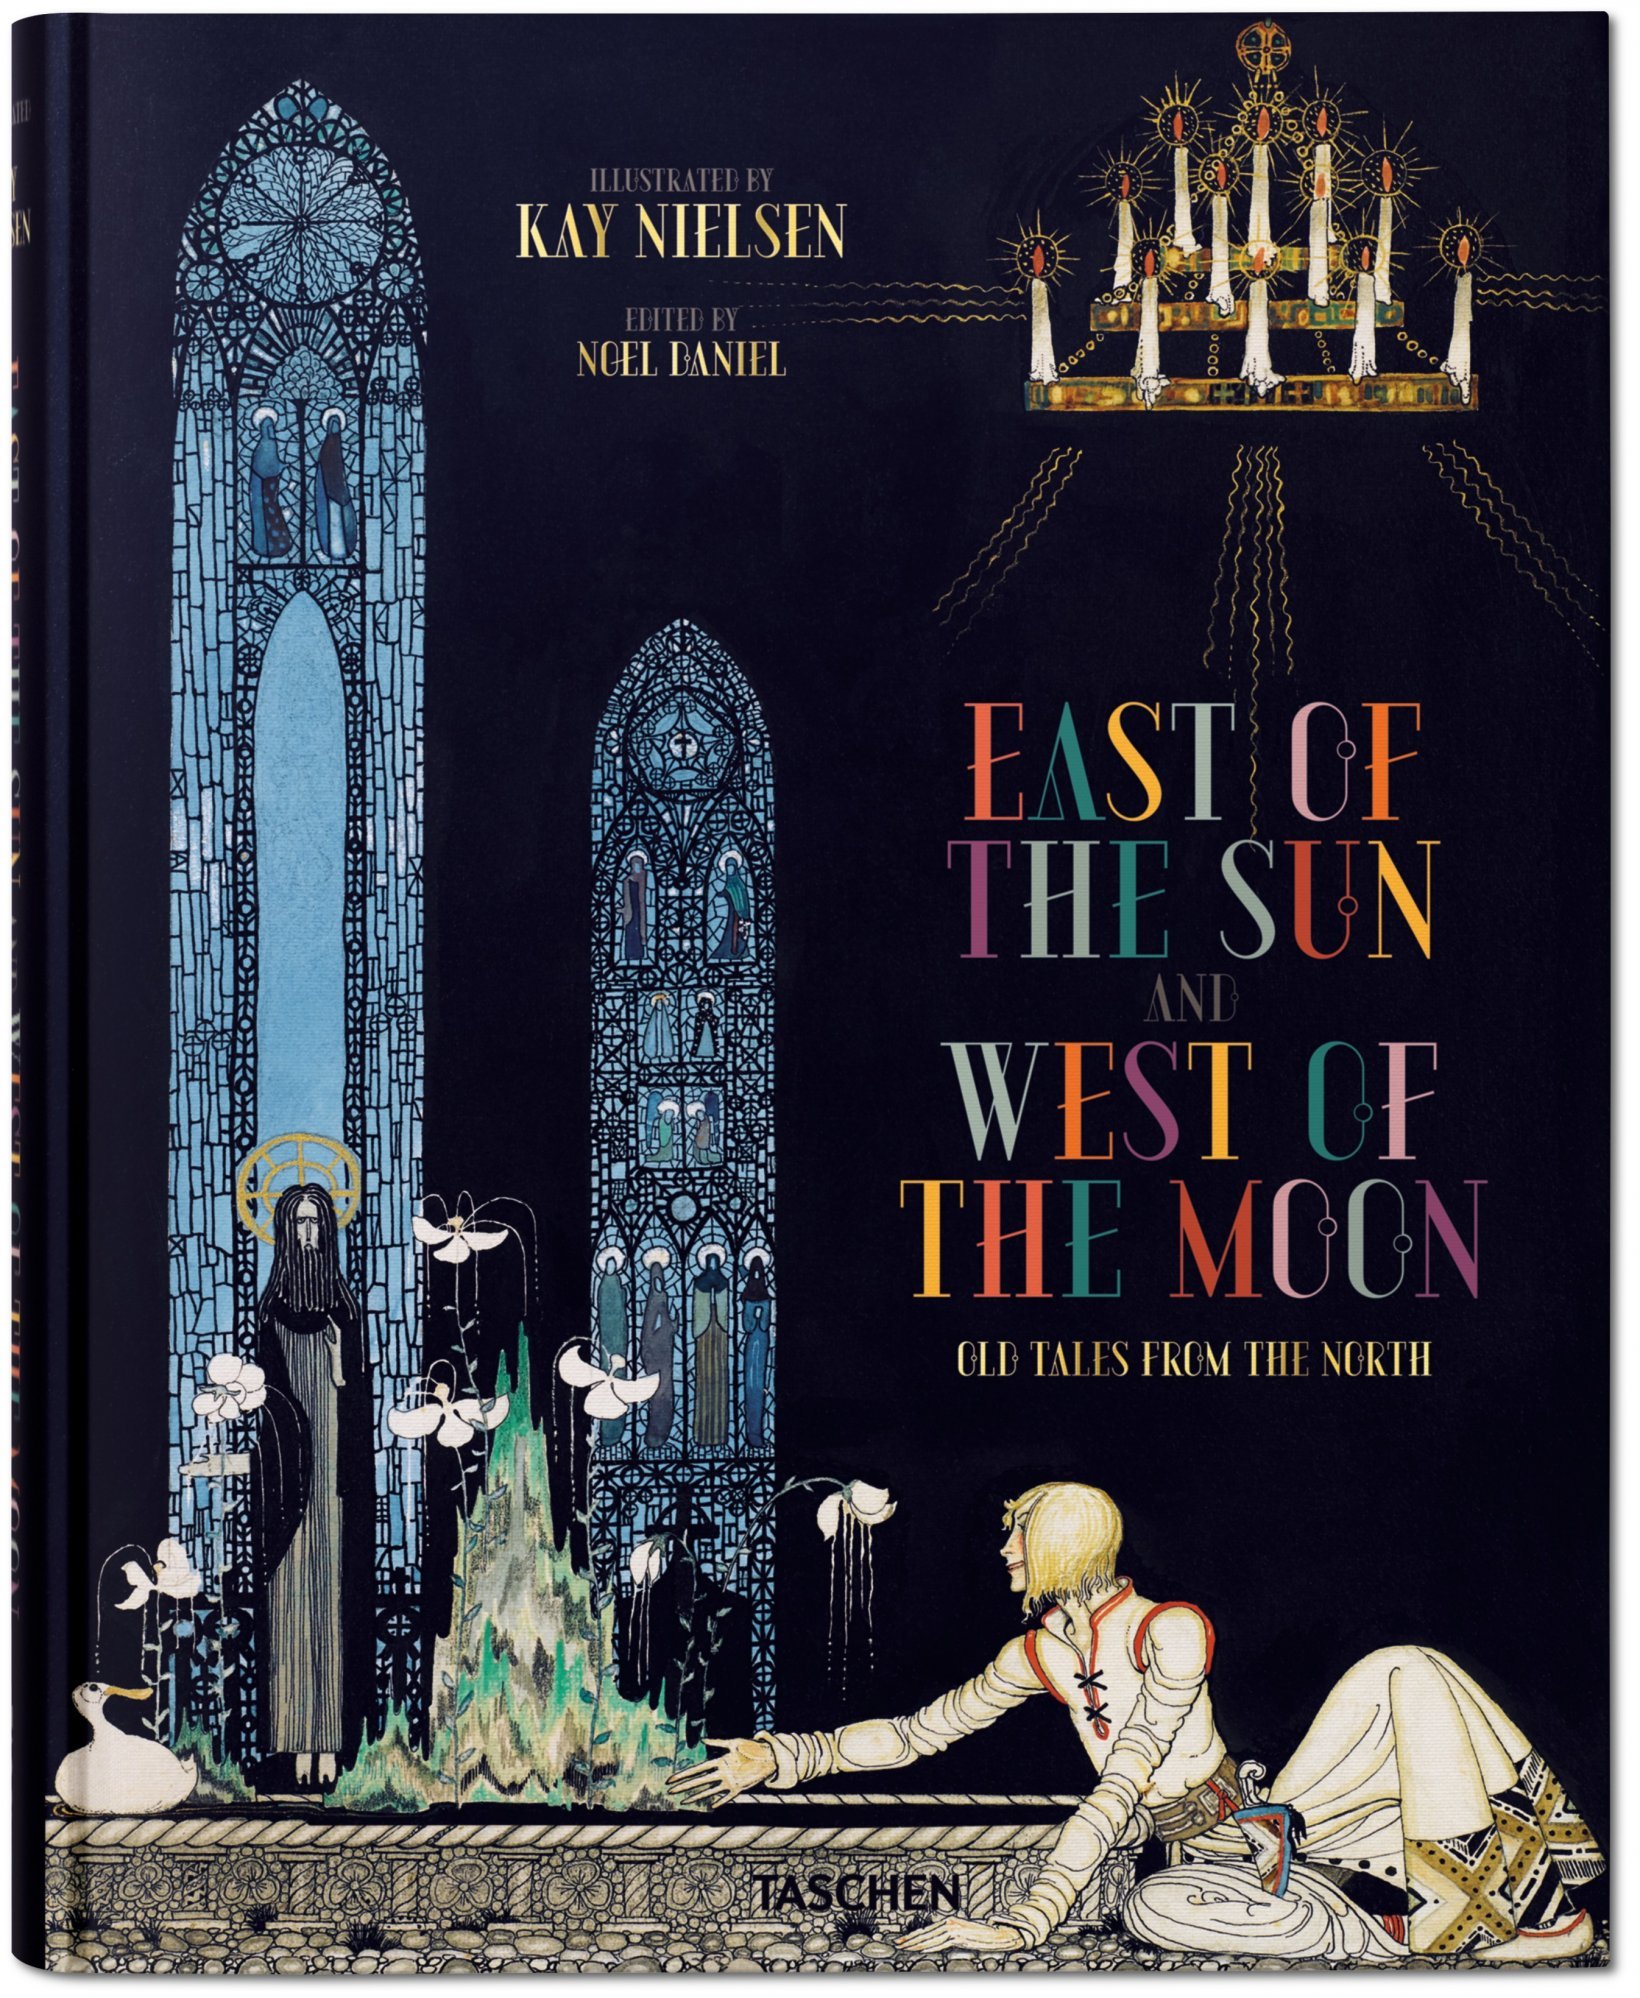 Kay Nielsen: East of the Sun and West of the Moon asian elements graphic design in the east